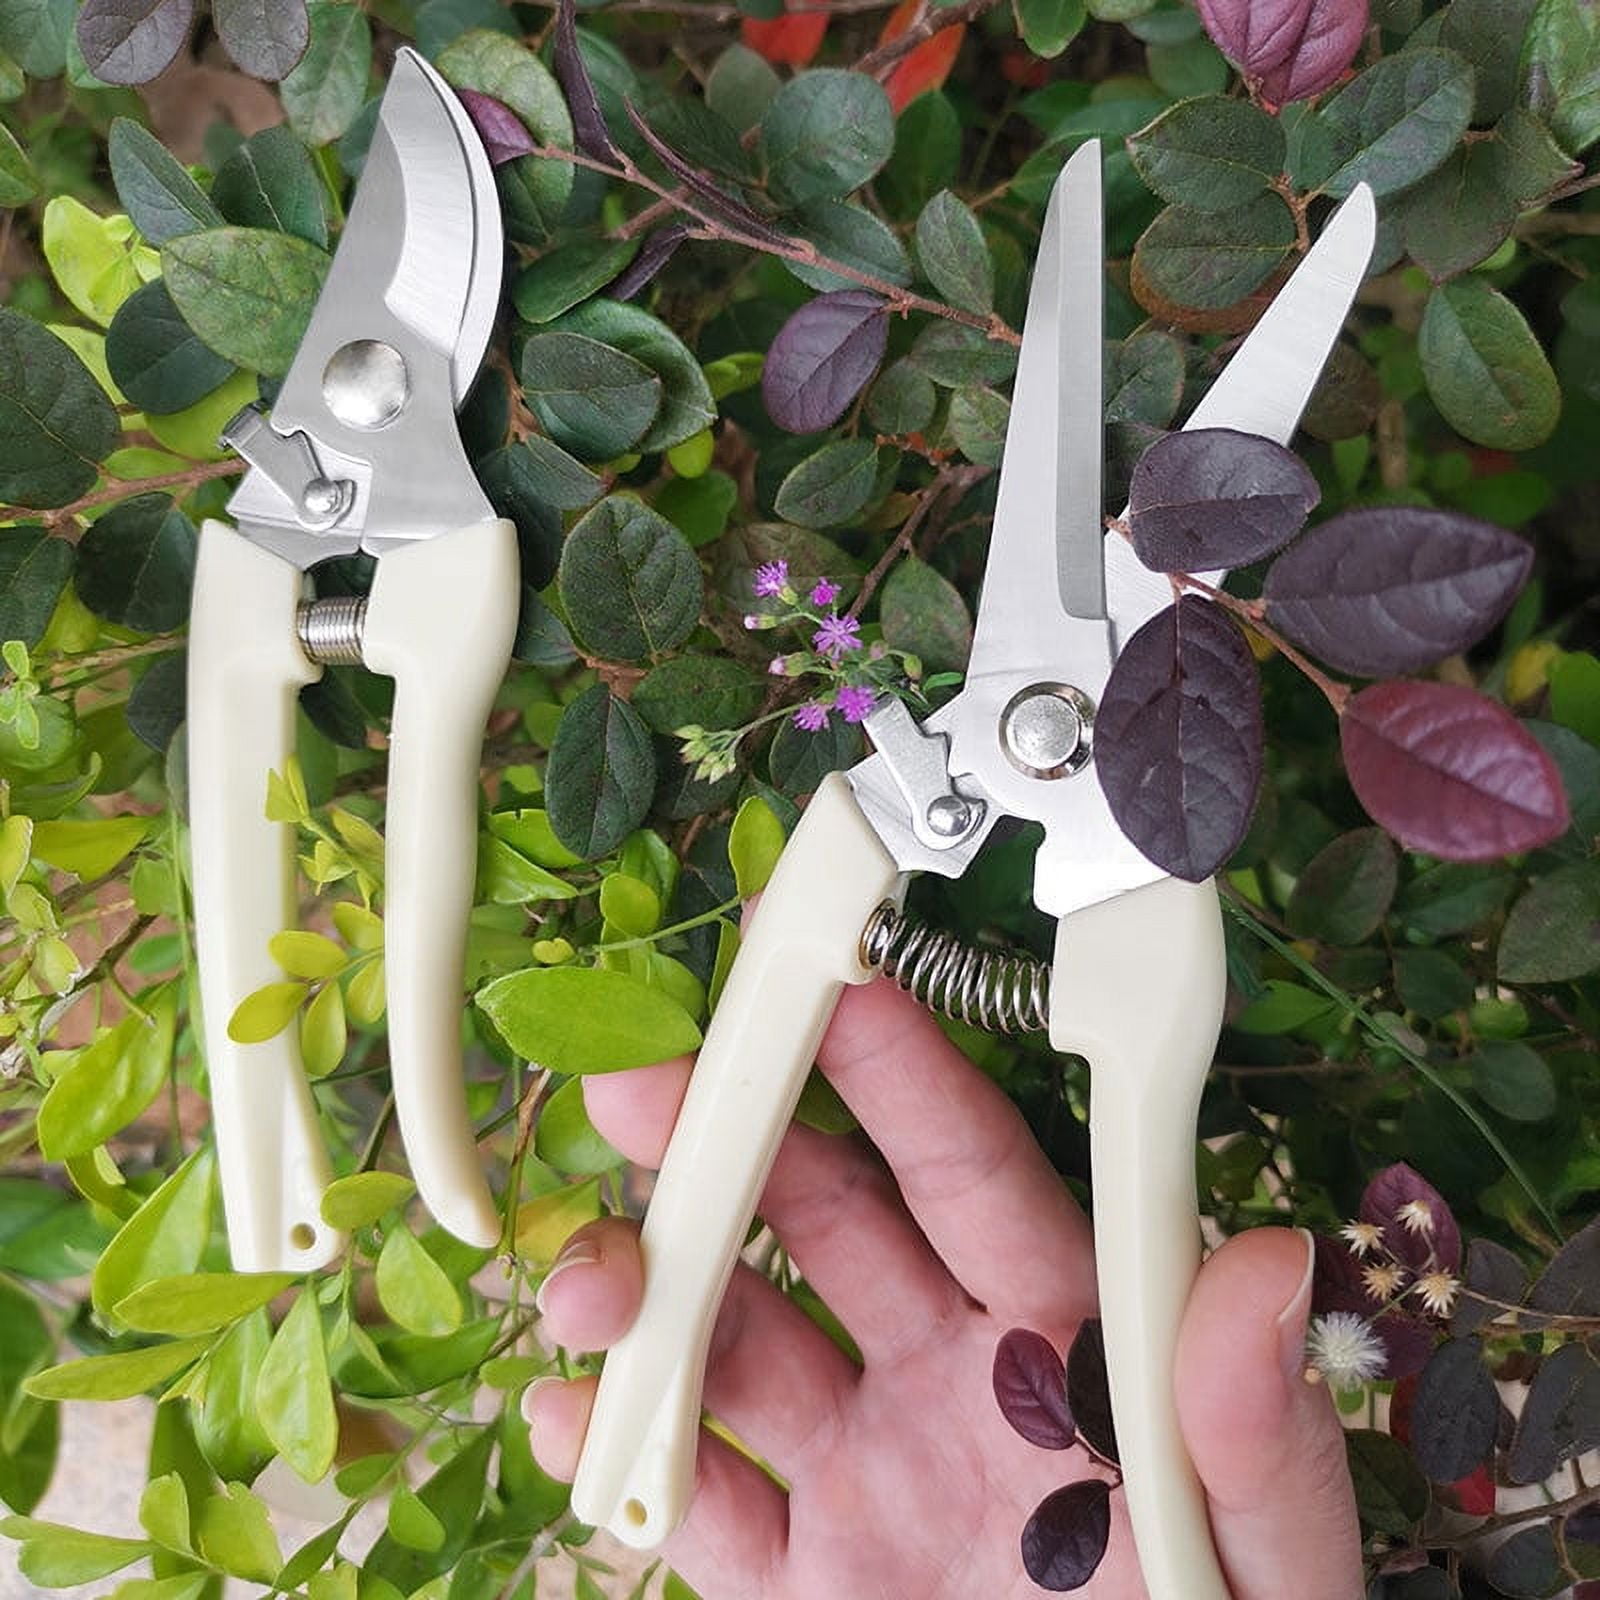 Felco Pruning Shears (F 13) - High Performance Swiss Made One-Hand or  Two-Hand Garden Pruner with Steel Blade : Hand Pruners : Patio, Lawn &  Garden 